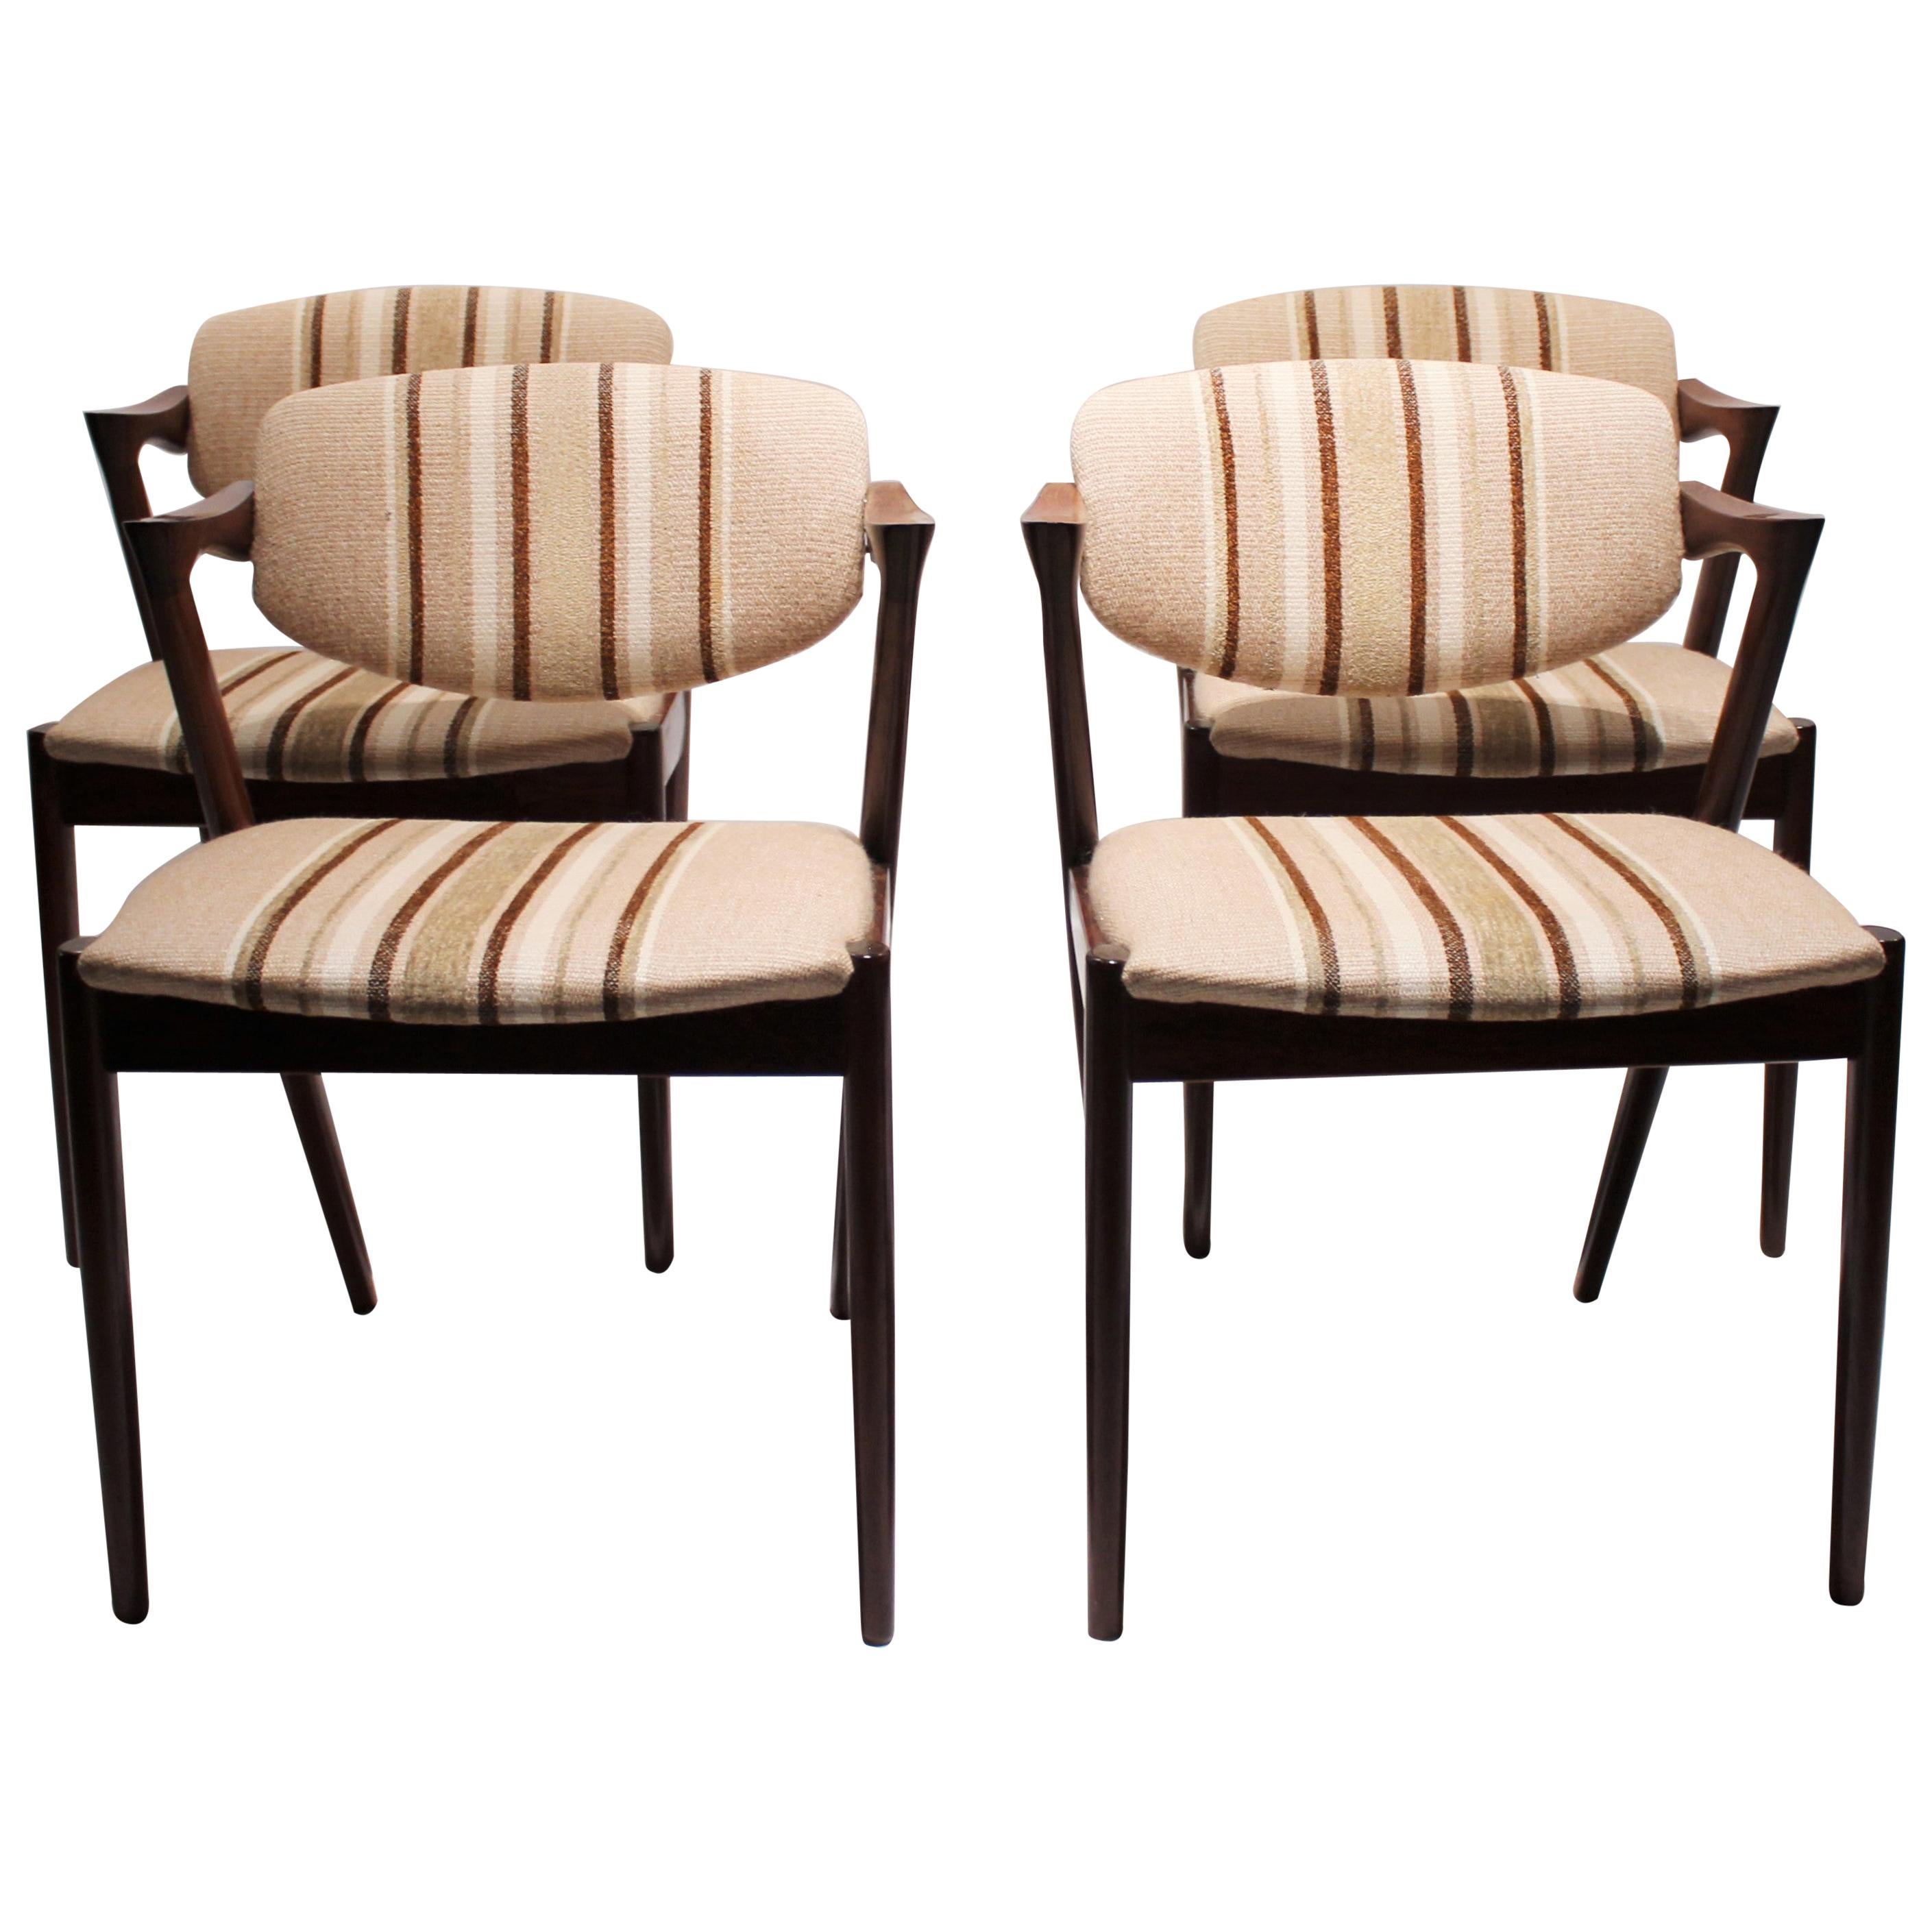 Set of 6 Dining Chairs, Model 42, by Kai Kristiansen and Schou Andersen, 1960s